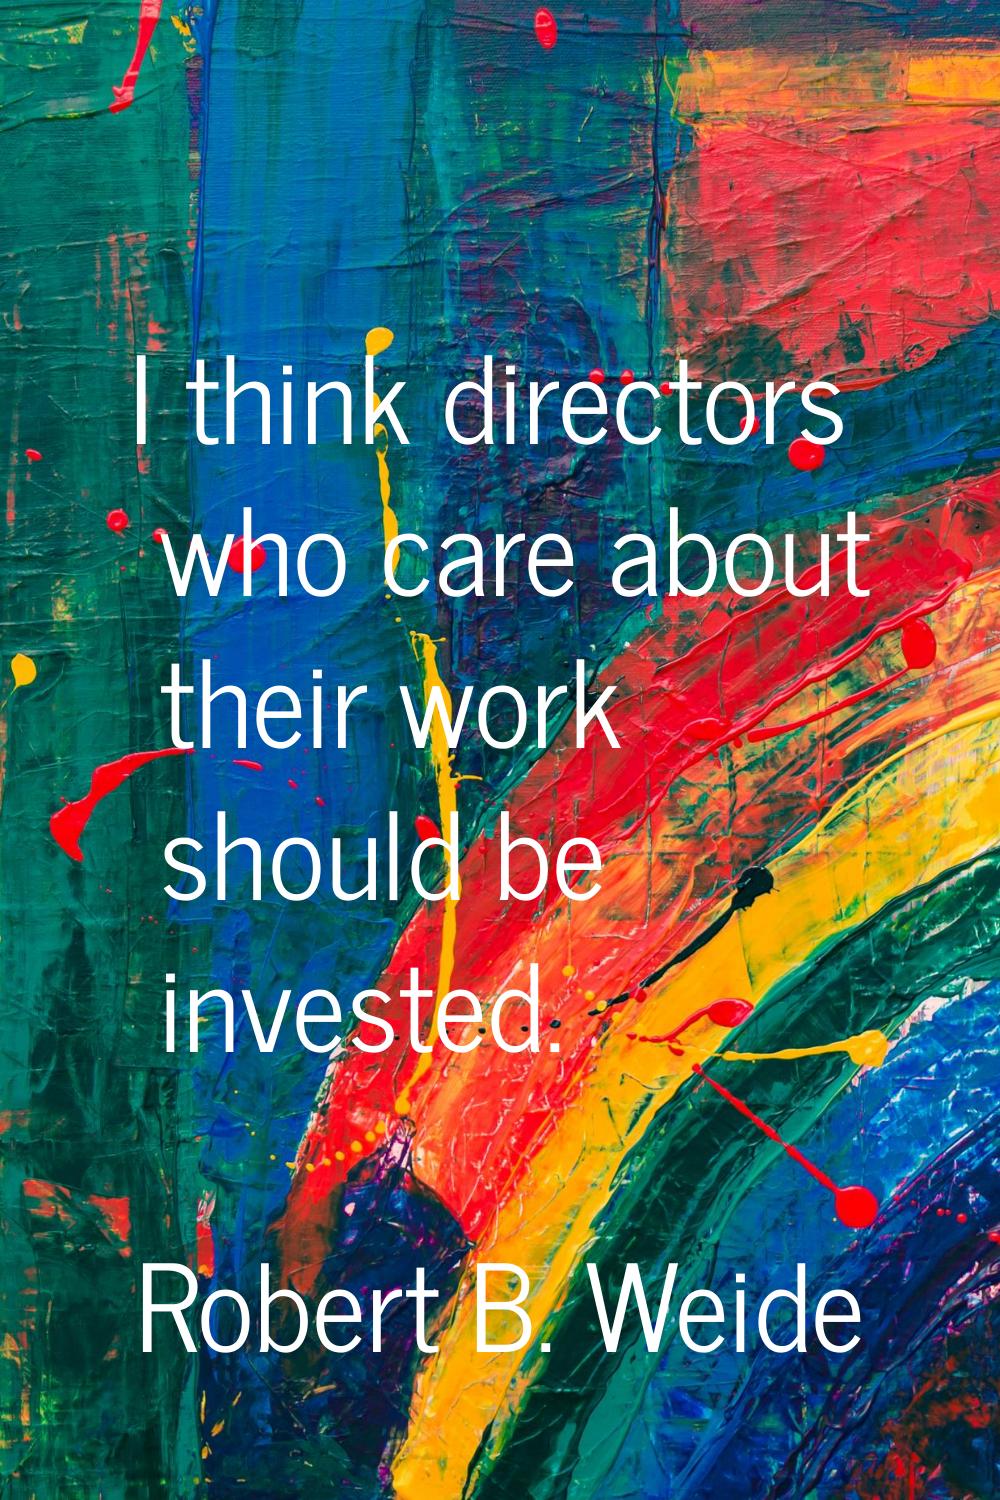 I think directors who care about their work should be invested.